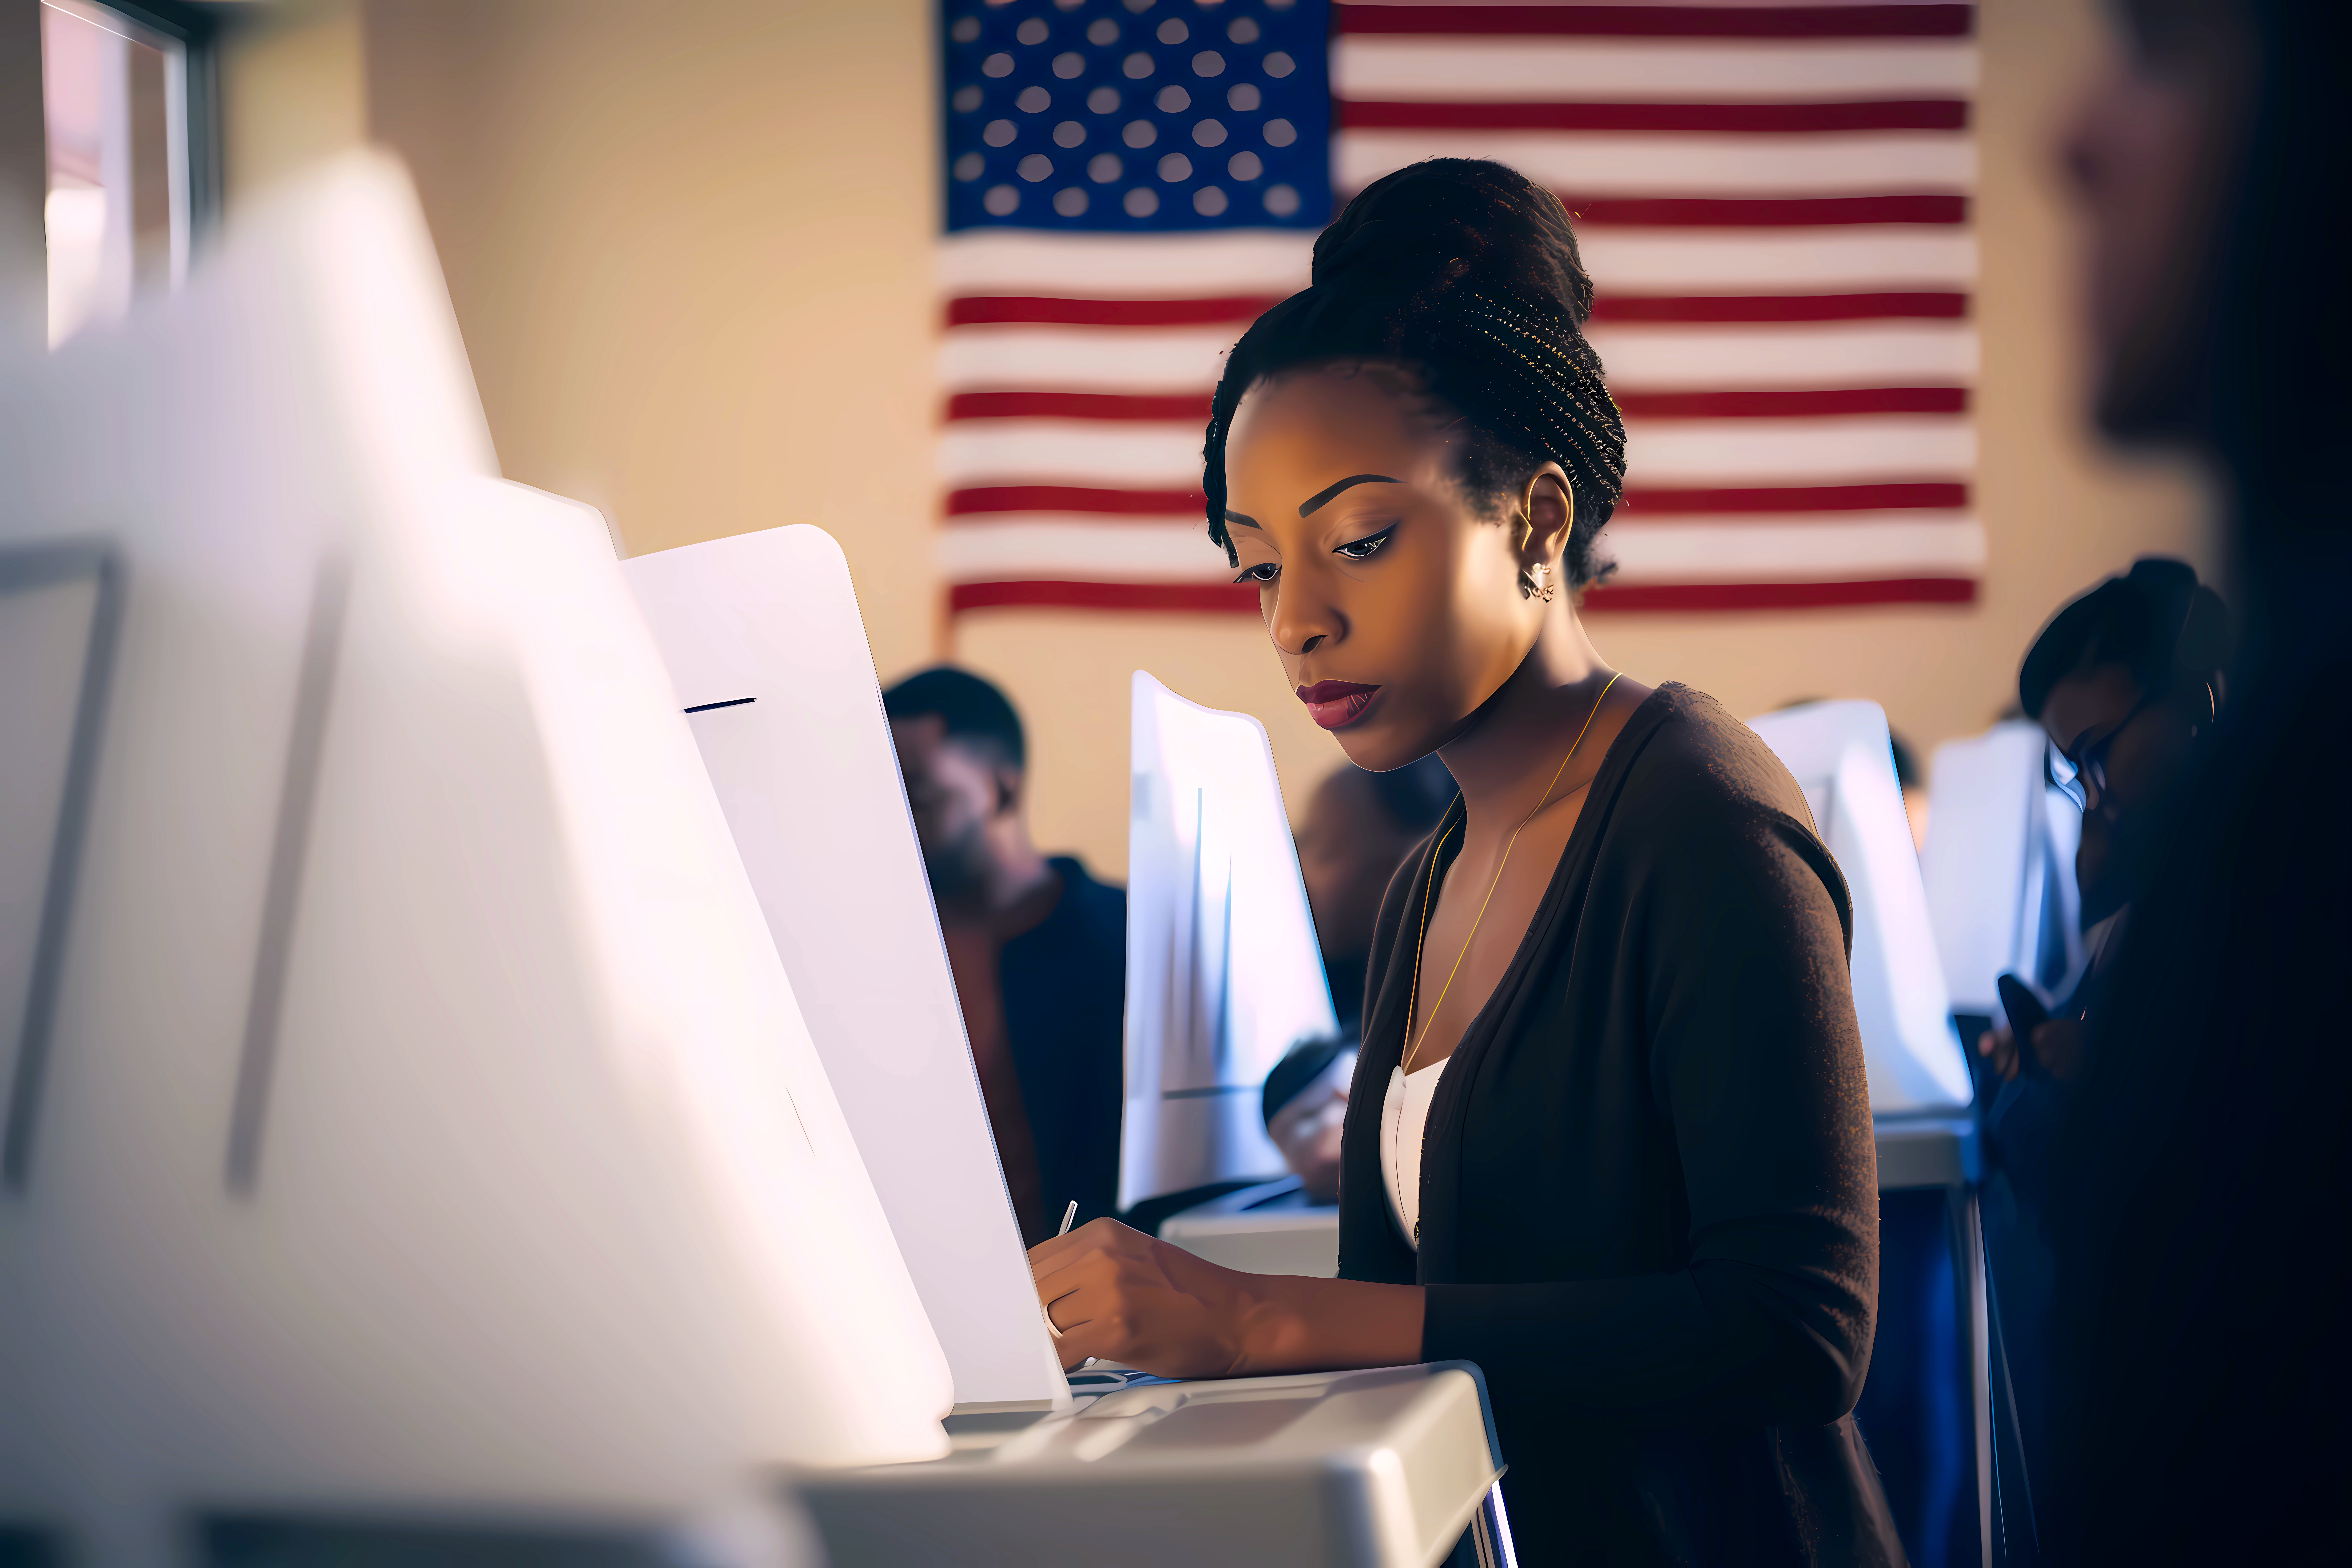 To Be Equal: Discriminatory laws have driven Black voters from the polls